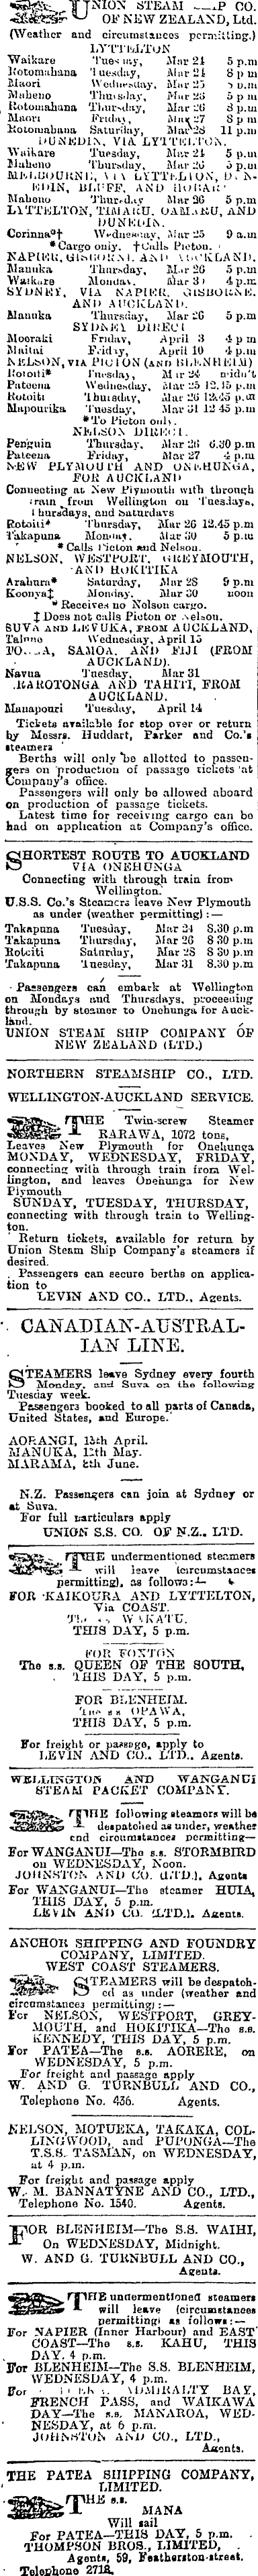 Papers Past Newspapers Evening Post 24 March 1908 Page 3 Advertisements Column 1